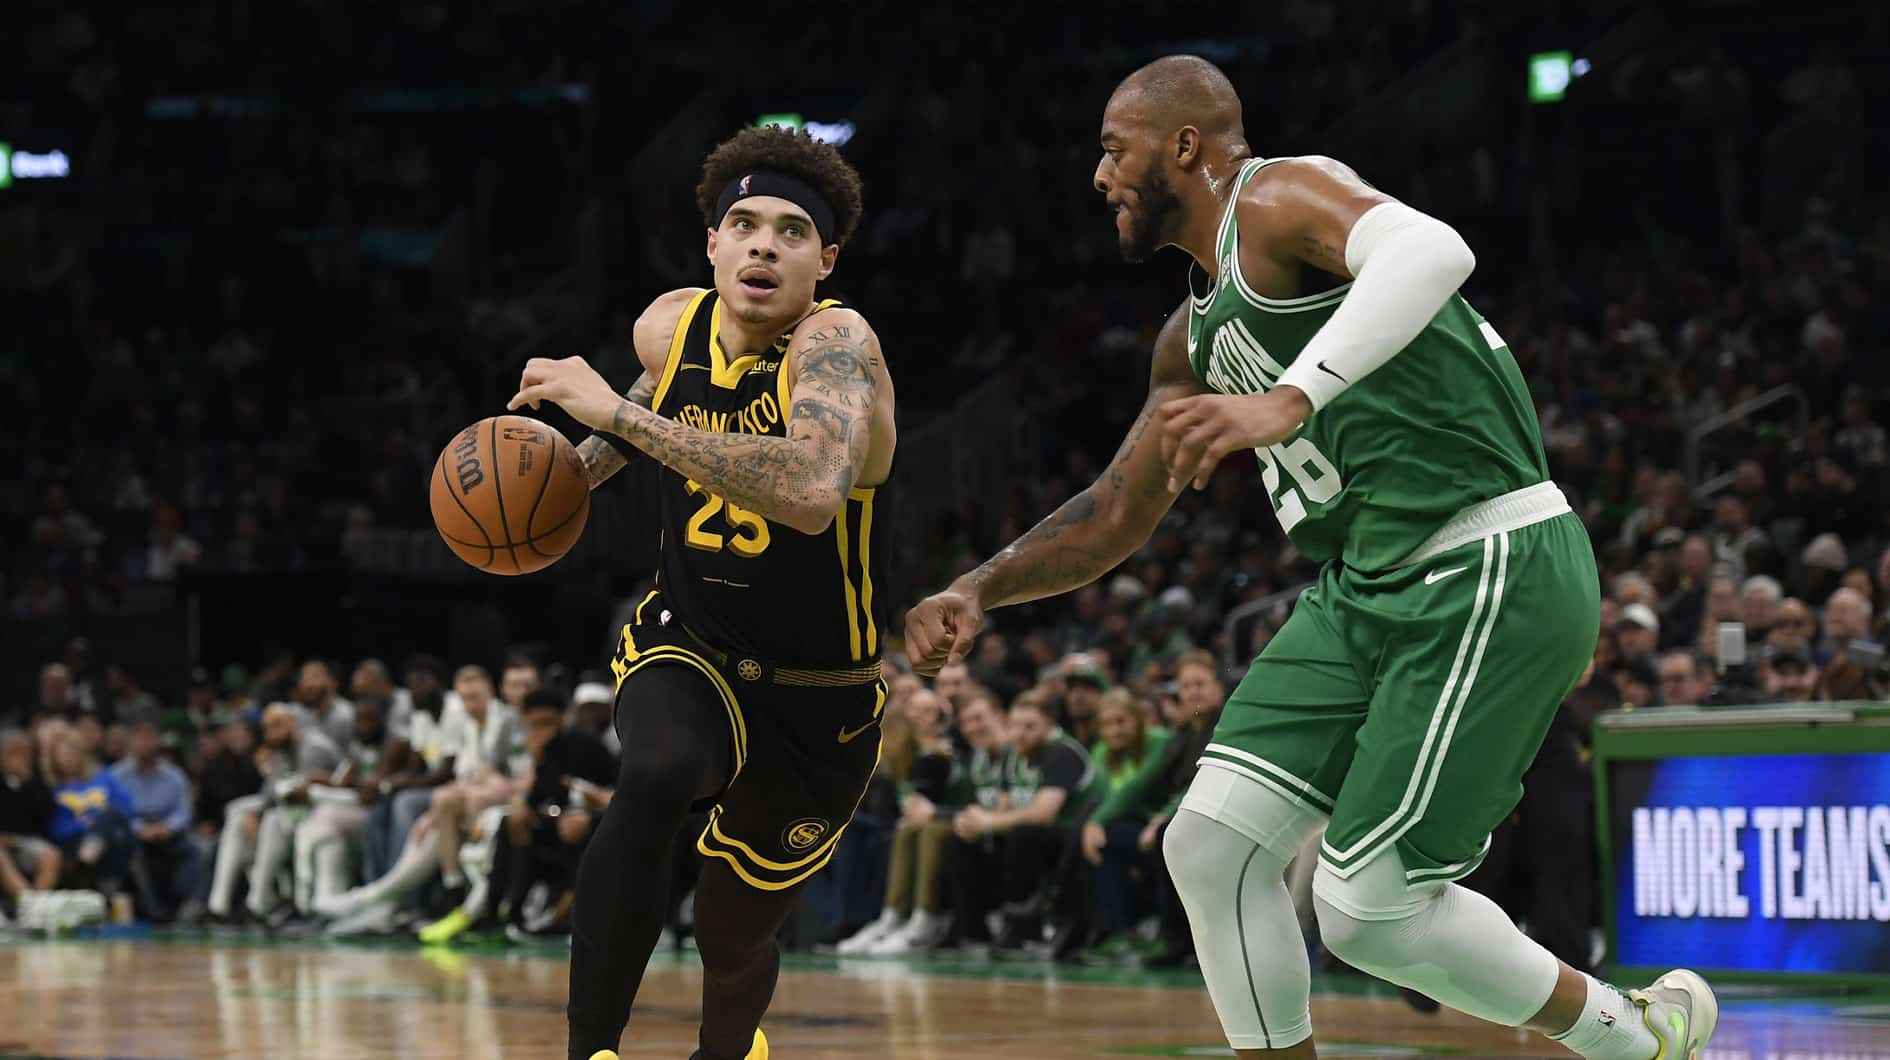 Golden State Warriors guard Lester Quinones (25) drives to the basket while Boston Celtics forward Xavier Tillman (26) defends during the second half at TD Garden.